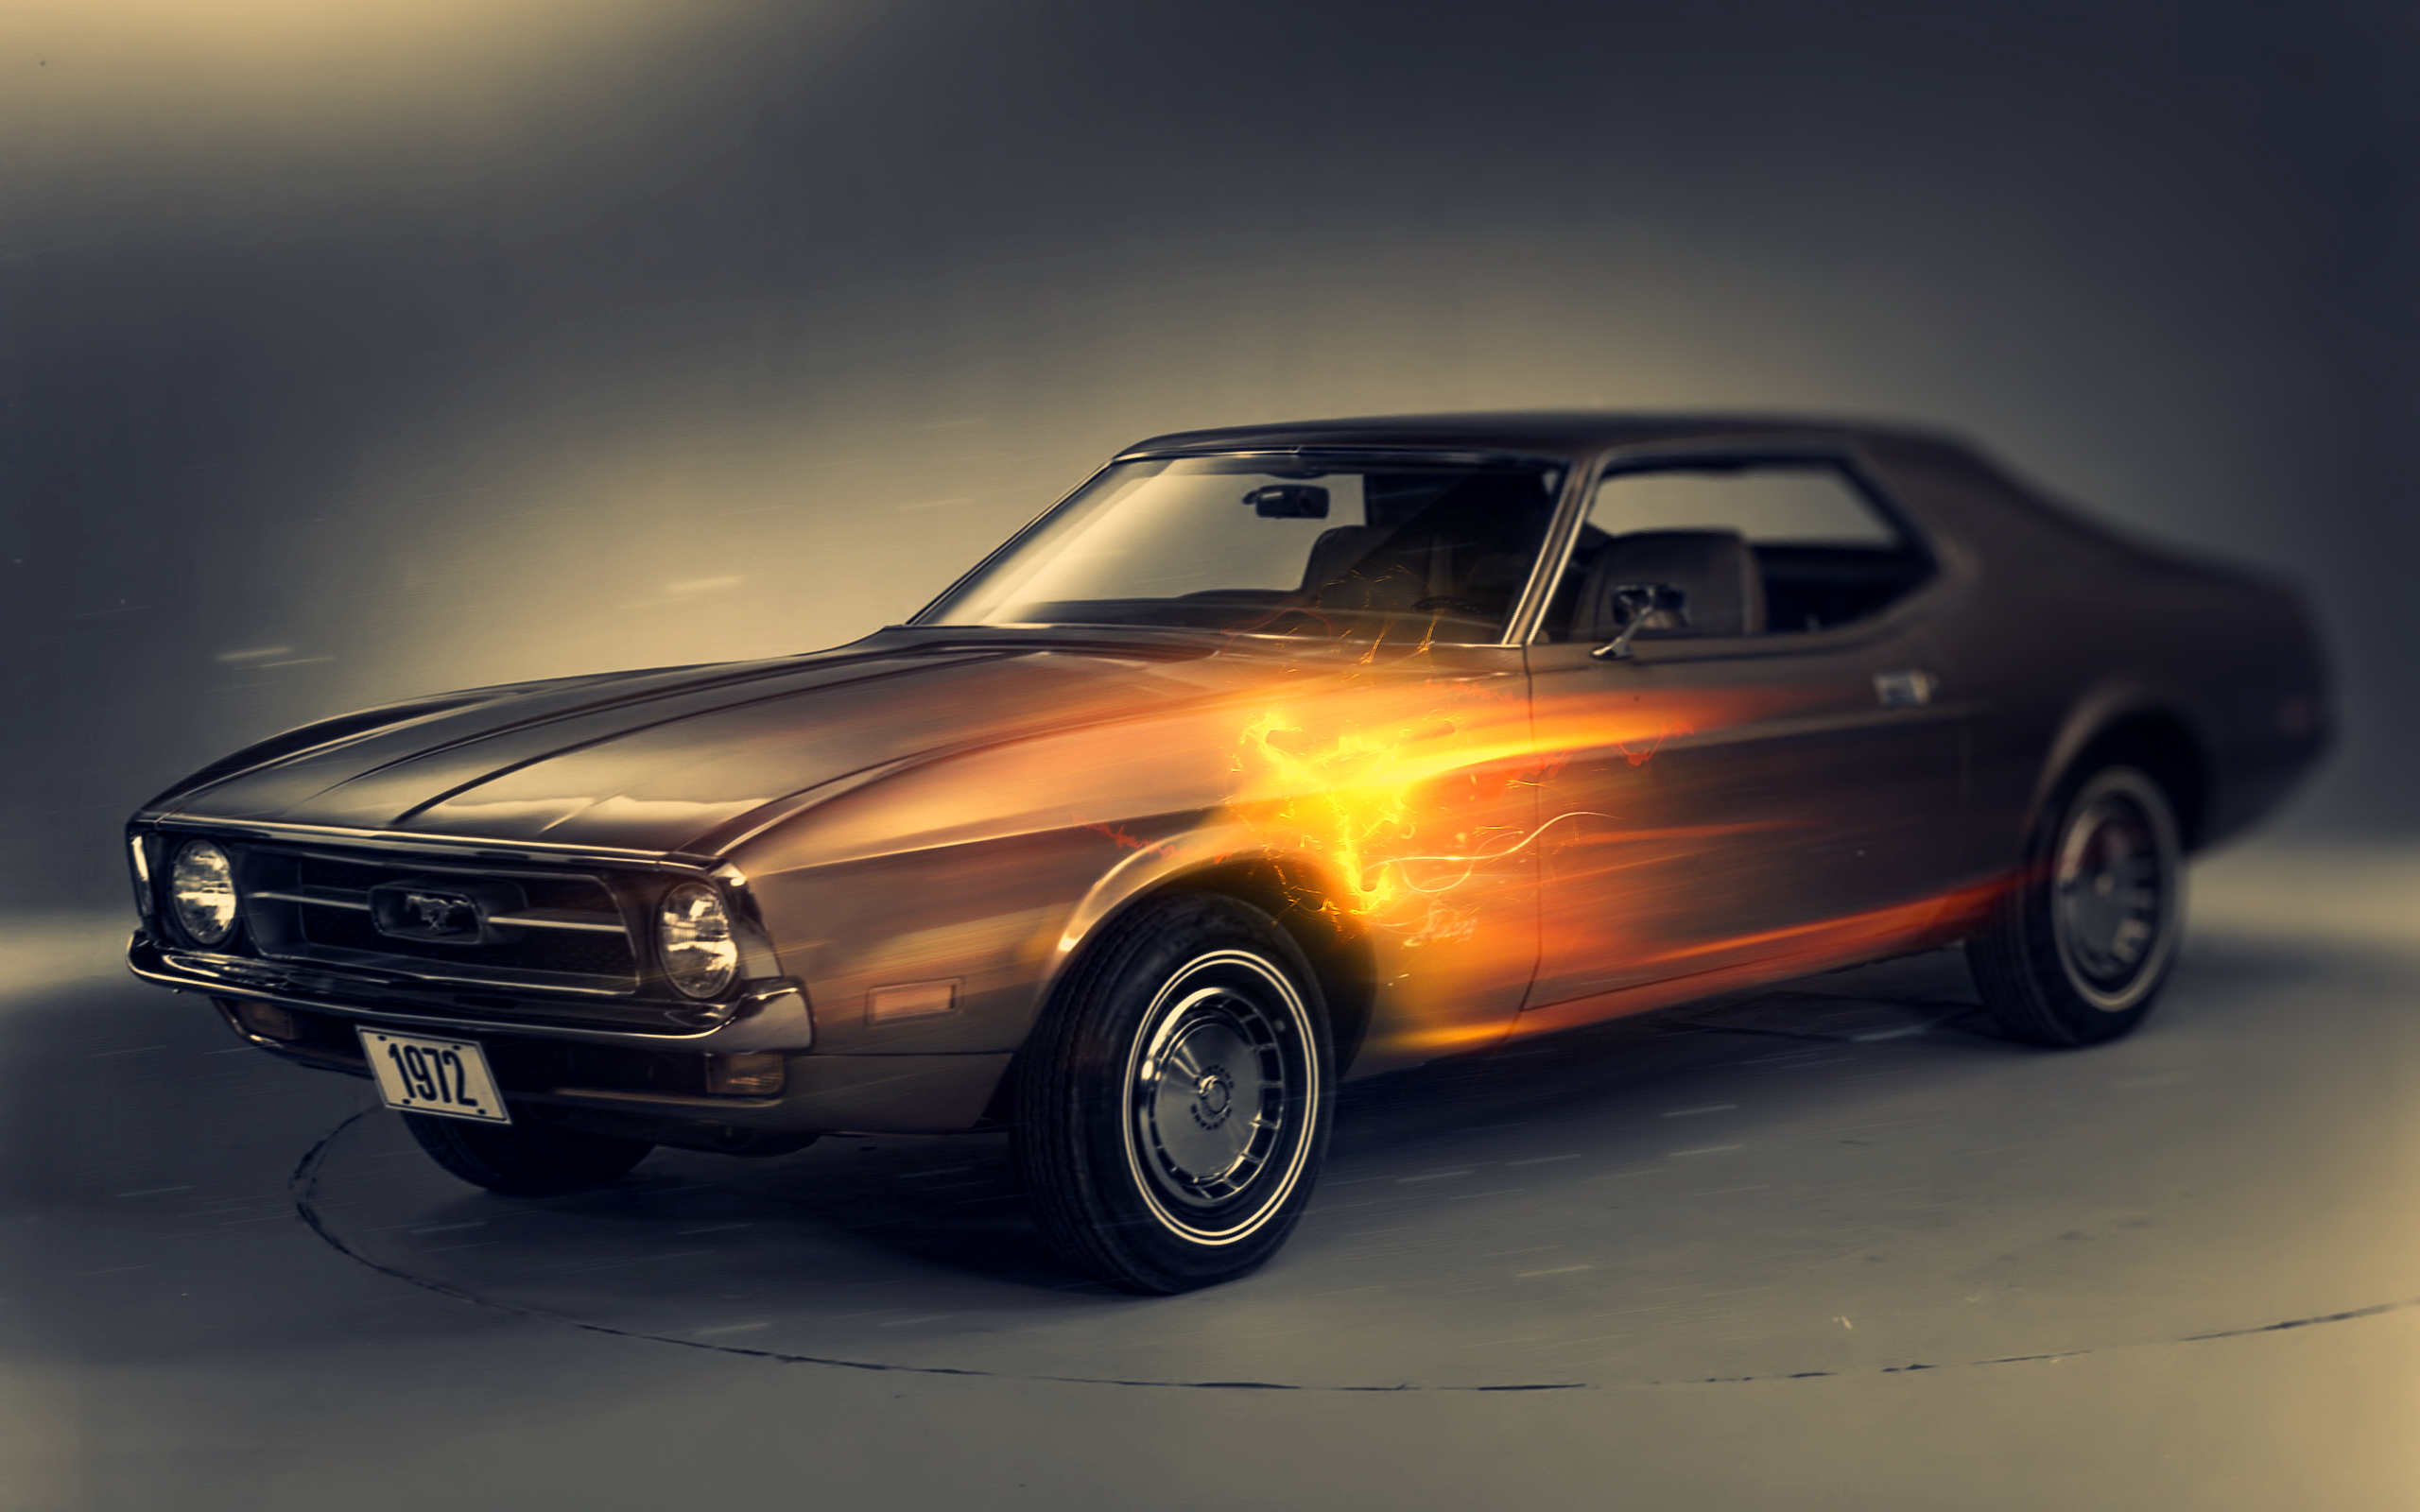 1972 Ford Mustang Wallpaper - 1972 Ford Mustang , HD Wallpaper & Backgrounds